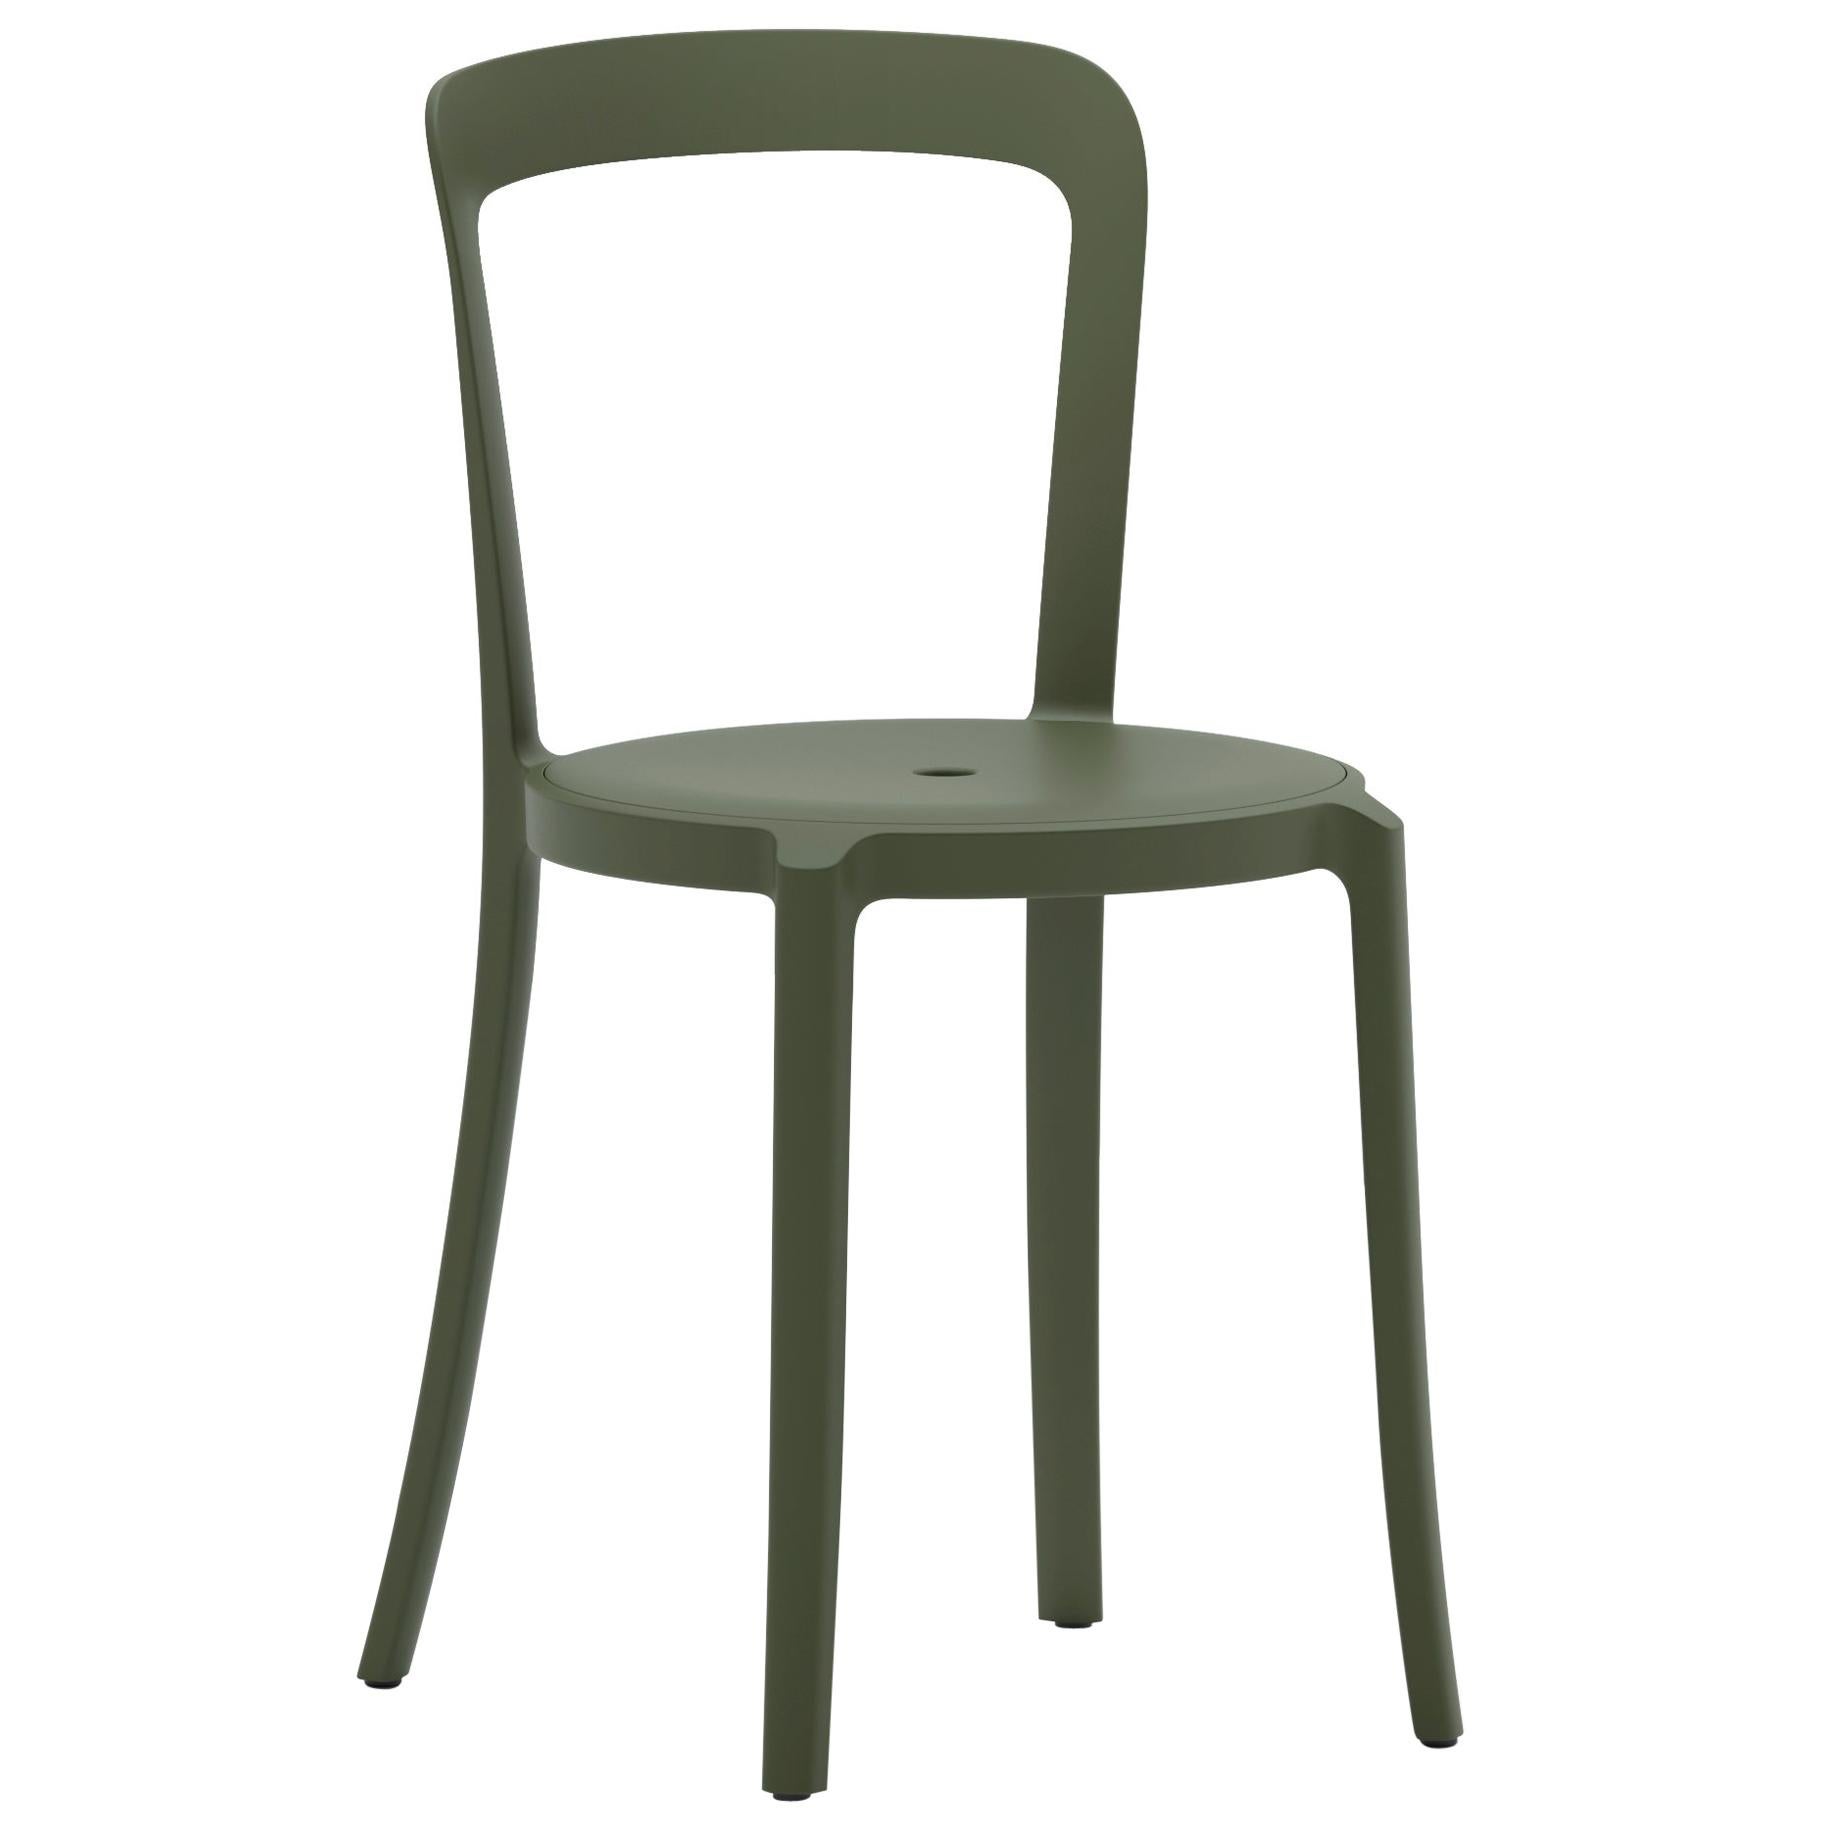 On & On Stacking Chair in Plastic with Green Frame by Barber & Osgerby